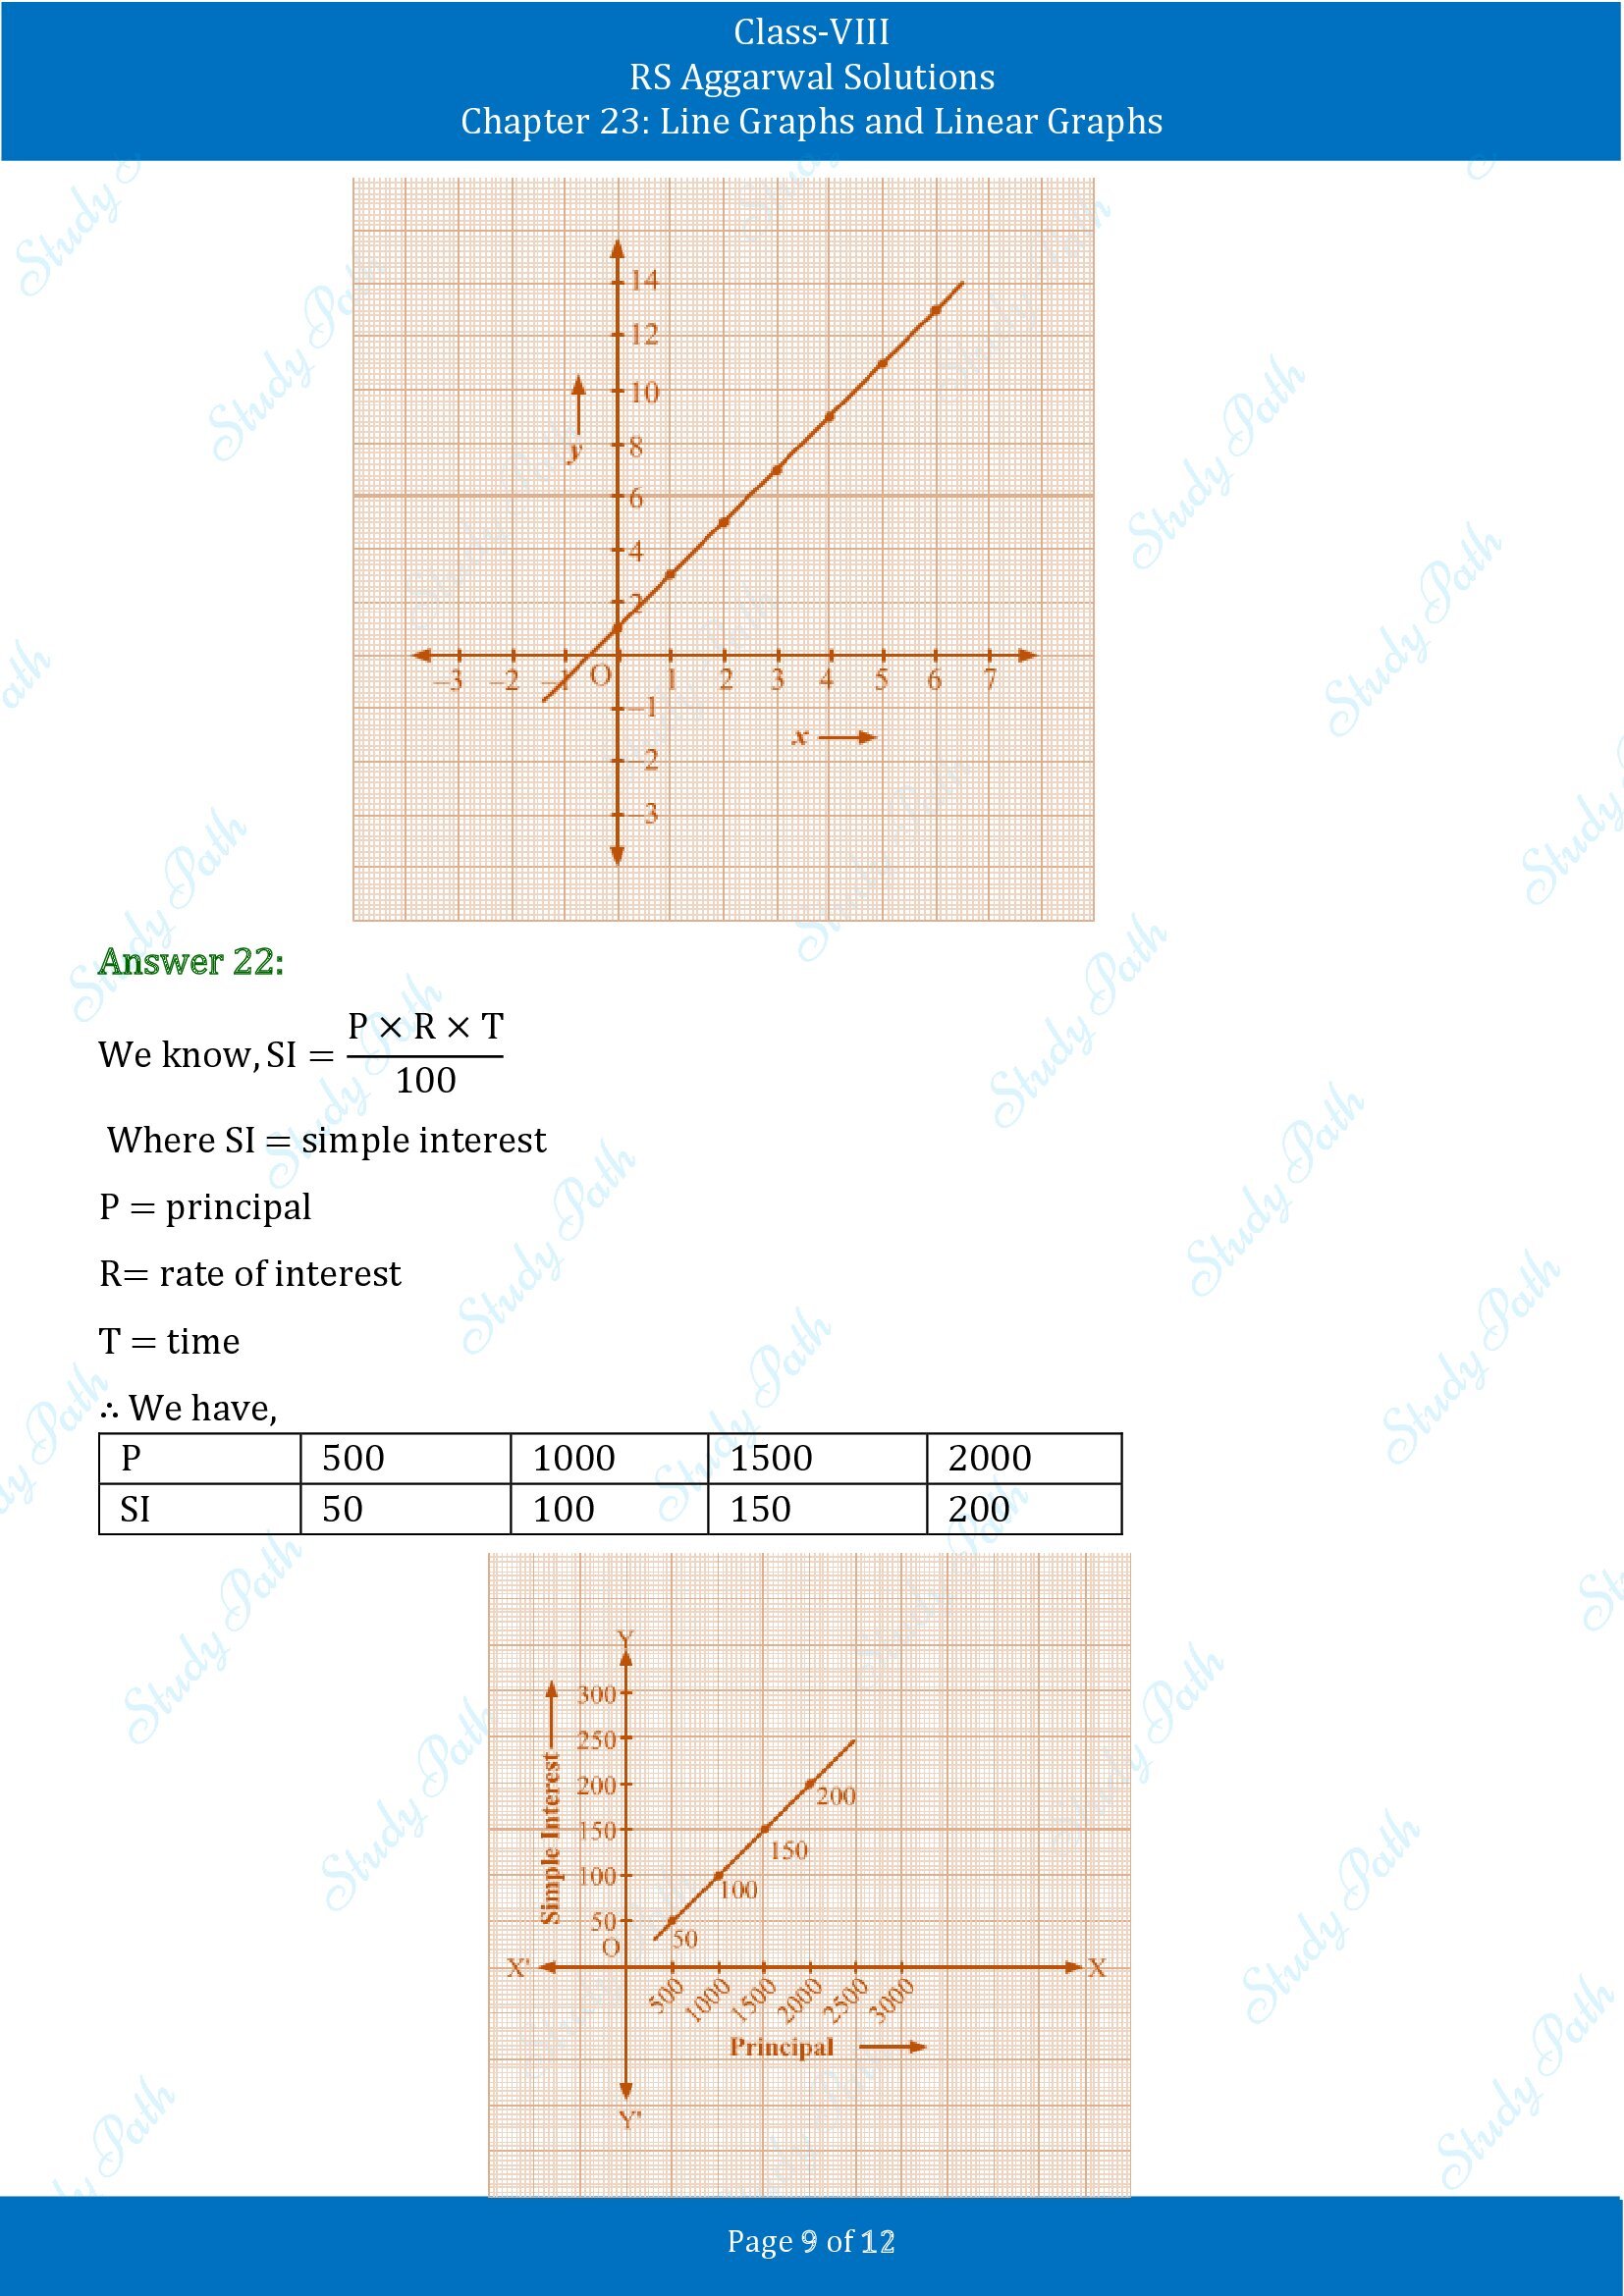 RS Aggarwal Solutions Class 8 Chapter 23 Line Graphs and Linear Graphs Exercise 23 00009